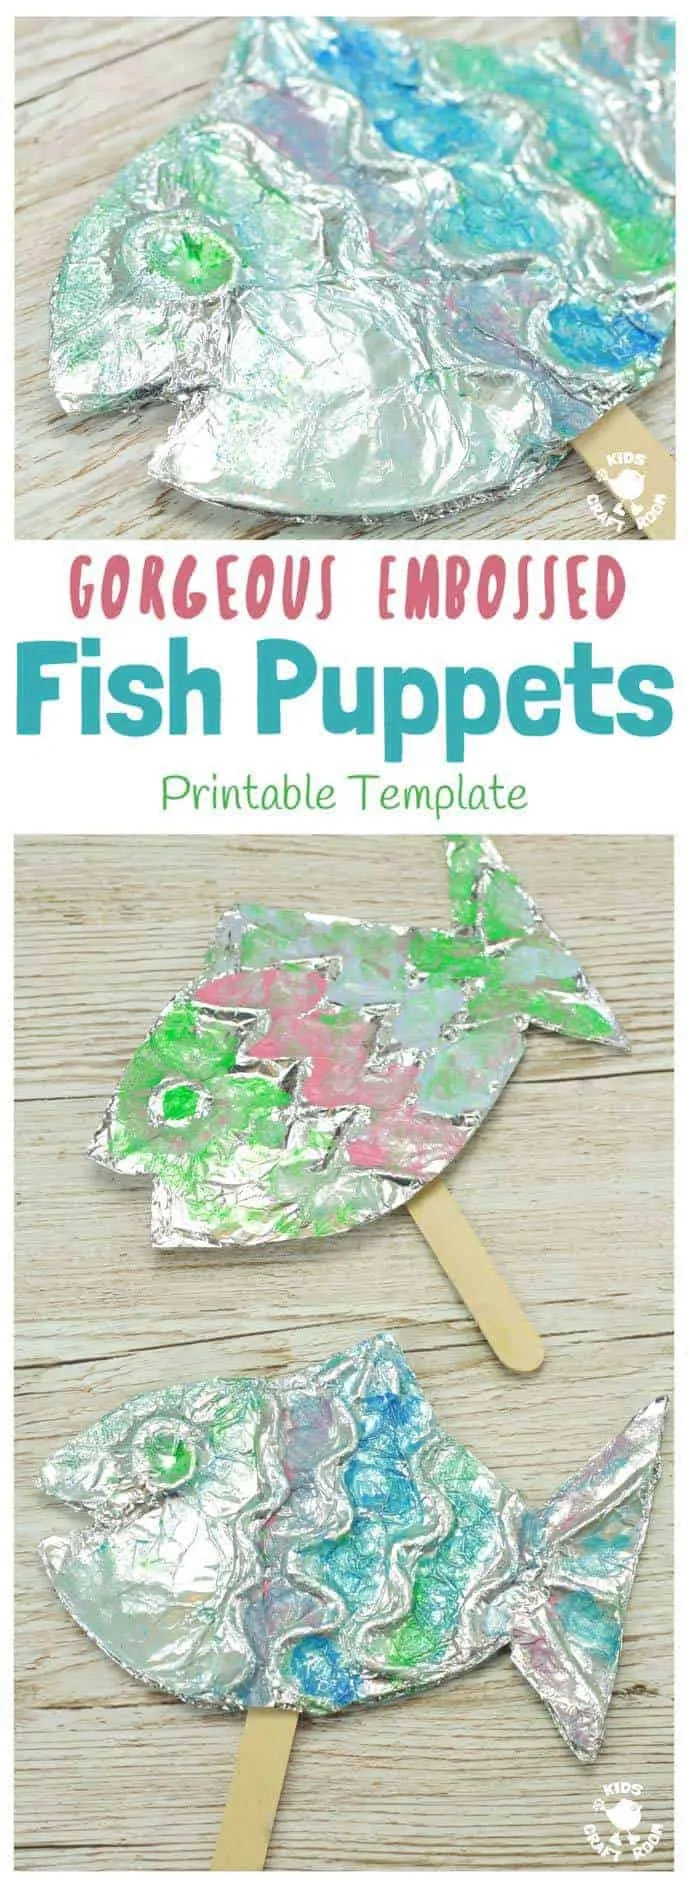 EMBOSSED FOIL FISH PUPPETS - A stunning fish craft with a difference! This embossed foil fish craft appeals to kids of all ages. Enjoy making fish puppets or fish pictures, the results are gorgeous! #fish #fishcrafts #ocean #oceancrafts #puppets #puppetcrafts #homemadepuppets #kidscrafts #craftsforkids #kidscraftroom #summercrafts #beachcrafts #kidsactivities